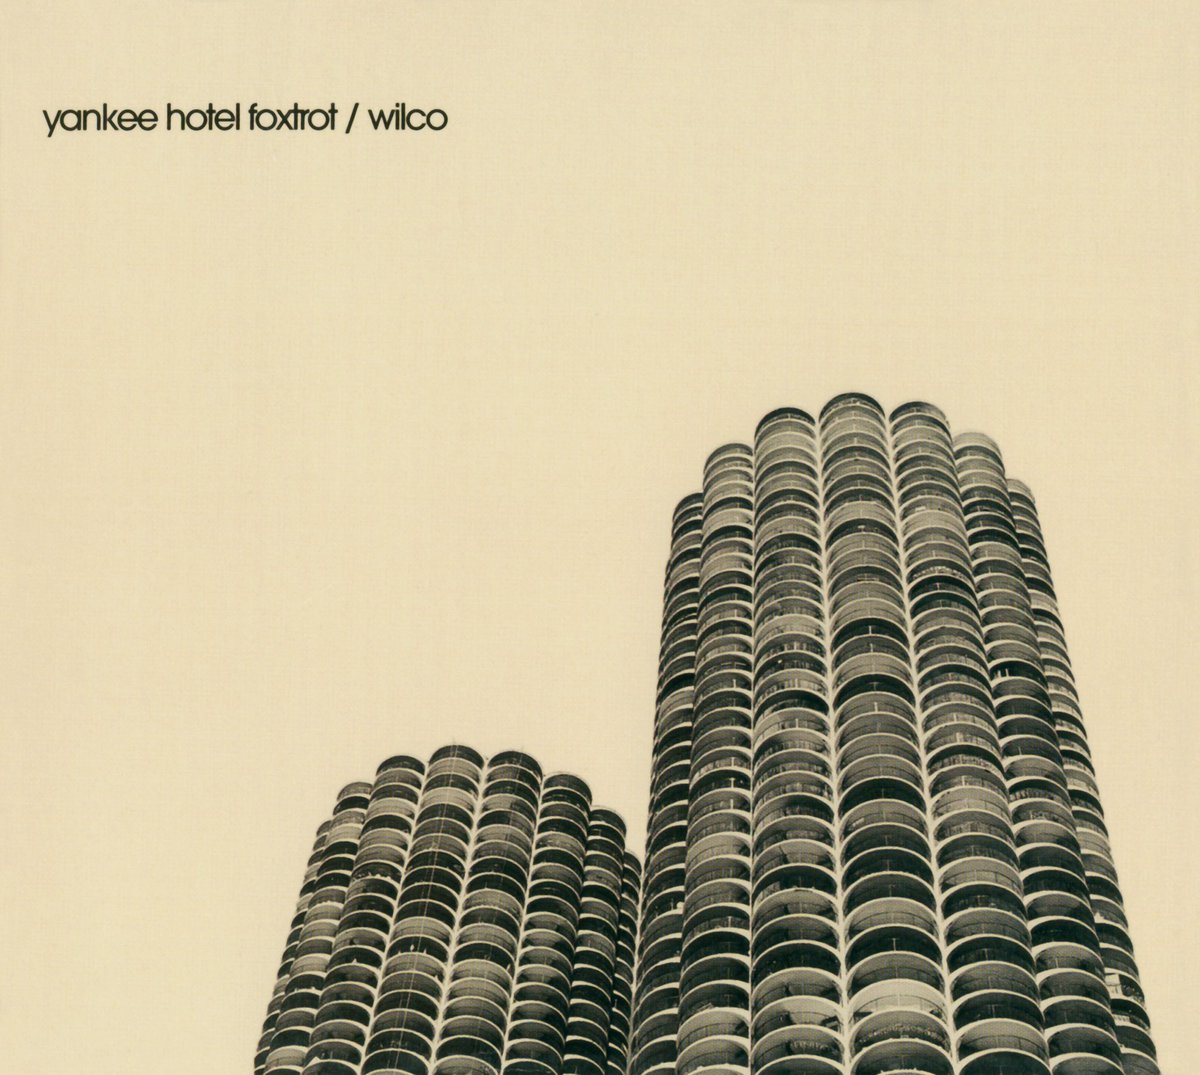 2002AOTY: Wilco - Yankee Hotel Foxtrot#2: Agalloch - The Mantle#3: Polaris - Home#4: Boards of Canada - GeogaddiTotal: 30